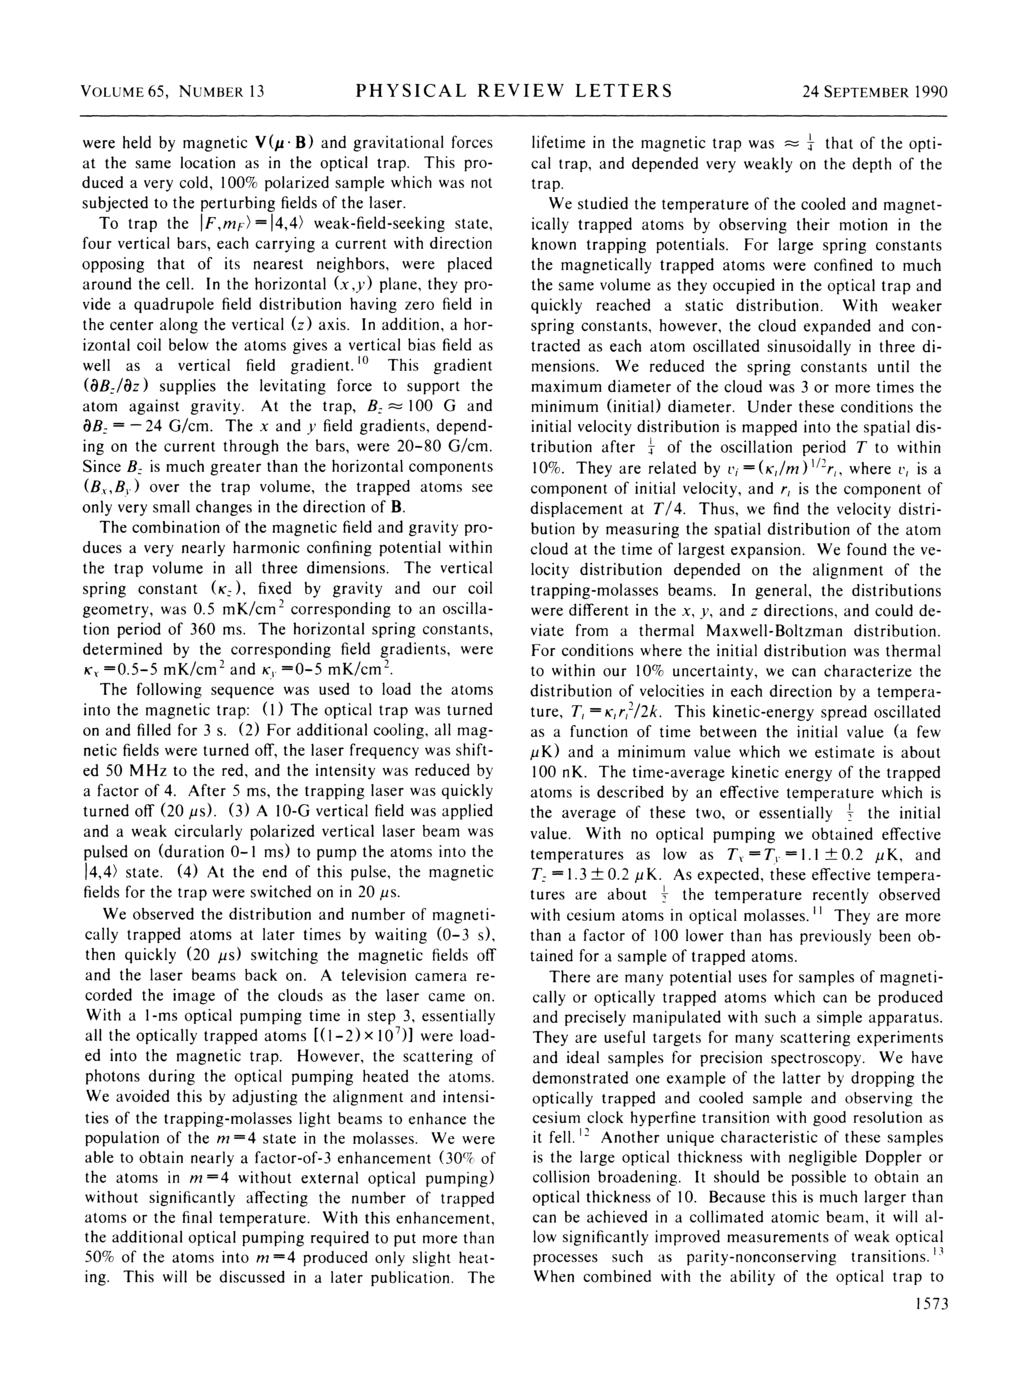 VOLUME 65, NUMBER 13 PHYSICAL REVIEW LETTERS 24 SEPTEMBER 1990 were held by magnetic V(p B) and gravitational forces at the same location as in the optical trap.